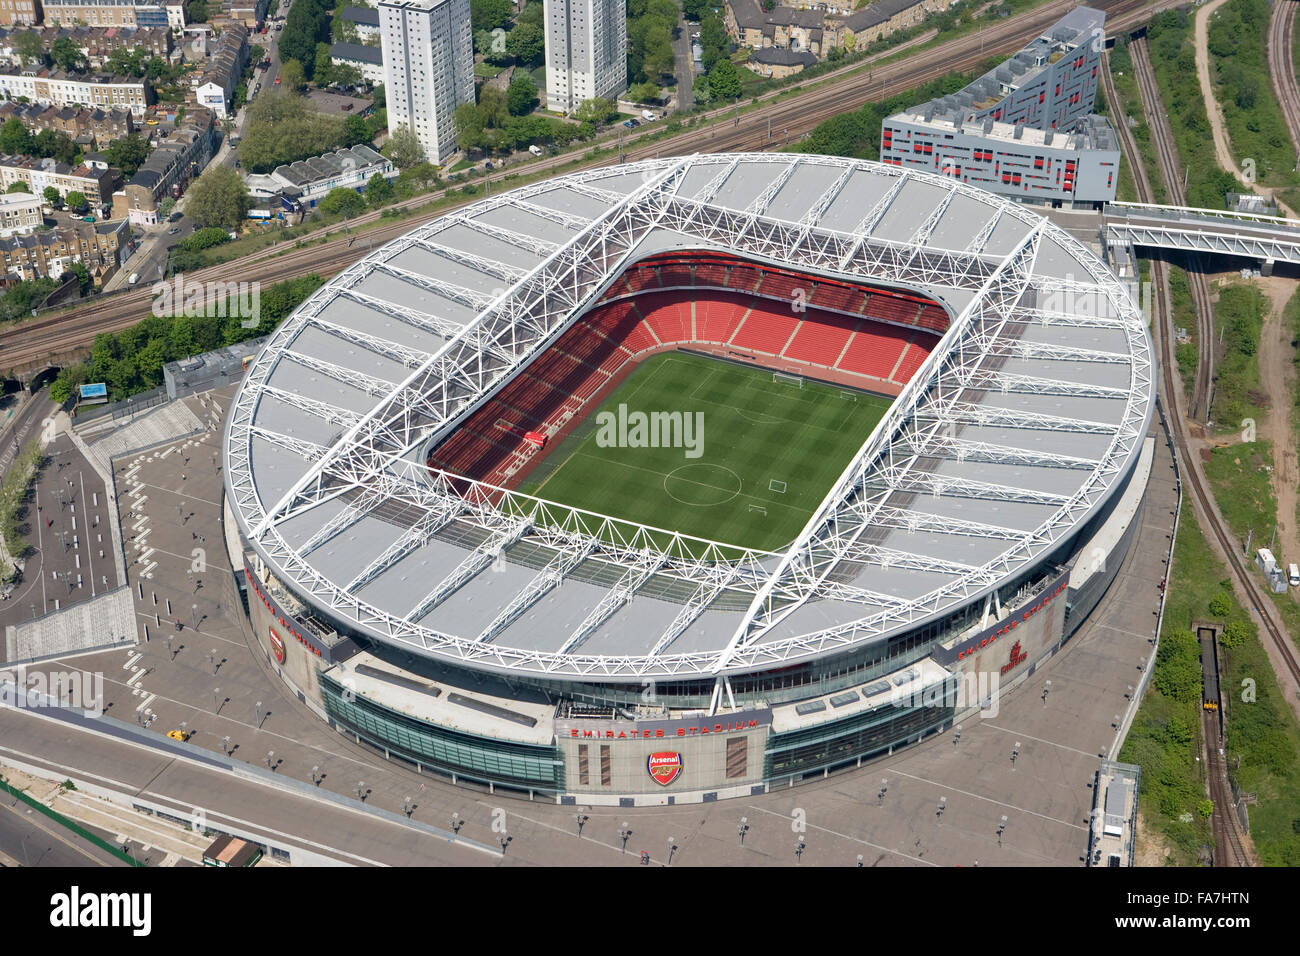 EMIRATES STADIUM, Arsenal, London. Aerial view. Opened in July 2006 as the replacement to Arsenal Football Club's historic home at Highbury. This 60, 000 all-seated stadium is located at Ashburton Grove. Photographed in May 2008. Stock Photo